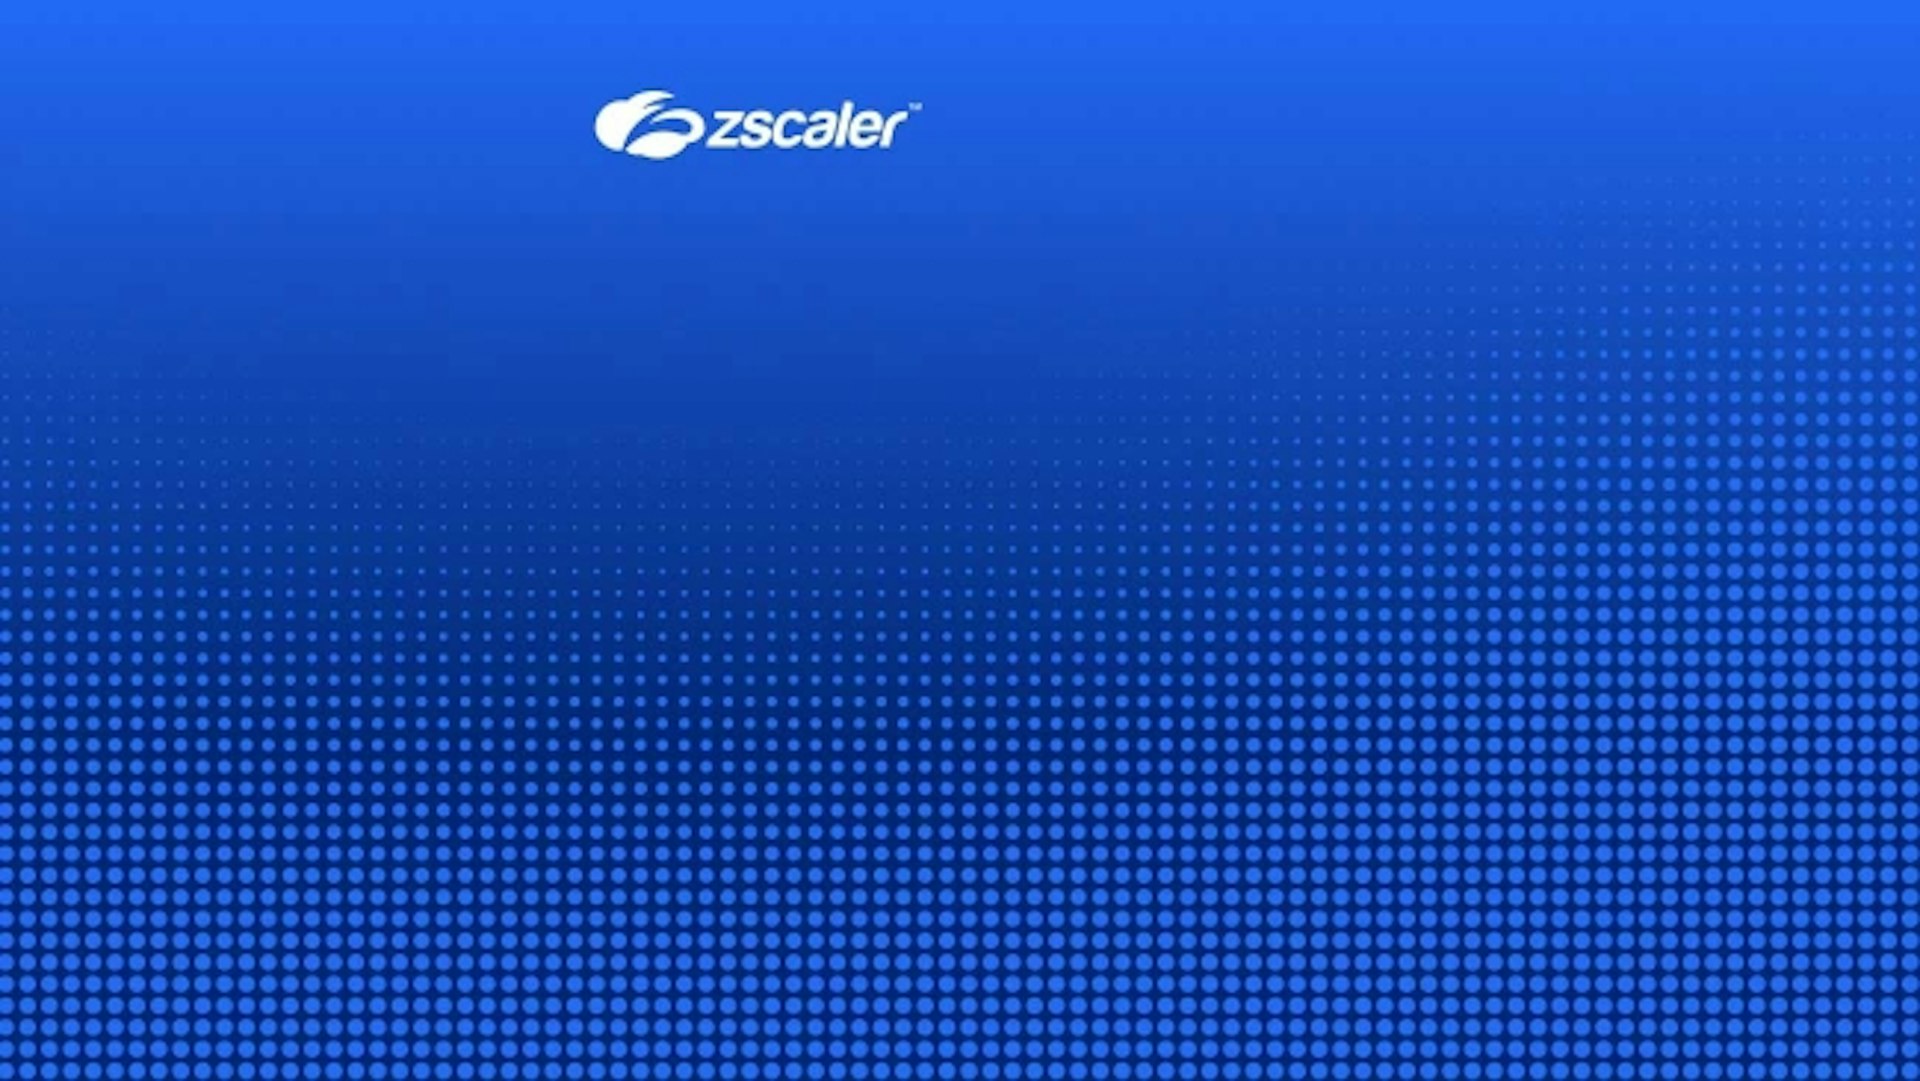 Zscaler Internet Access in Action